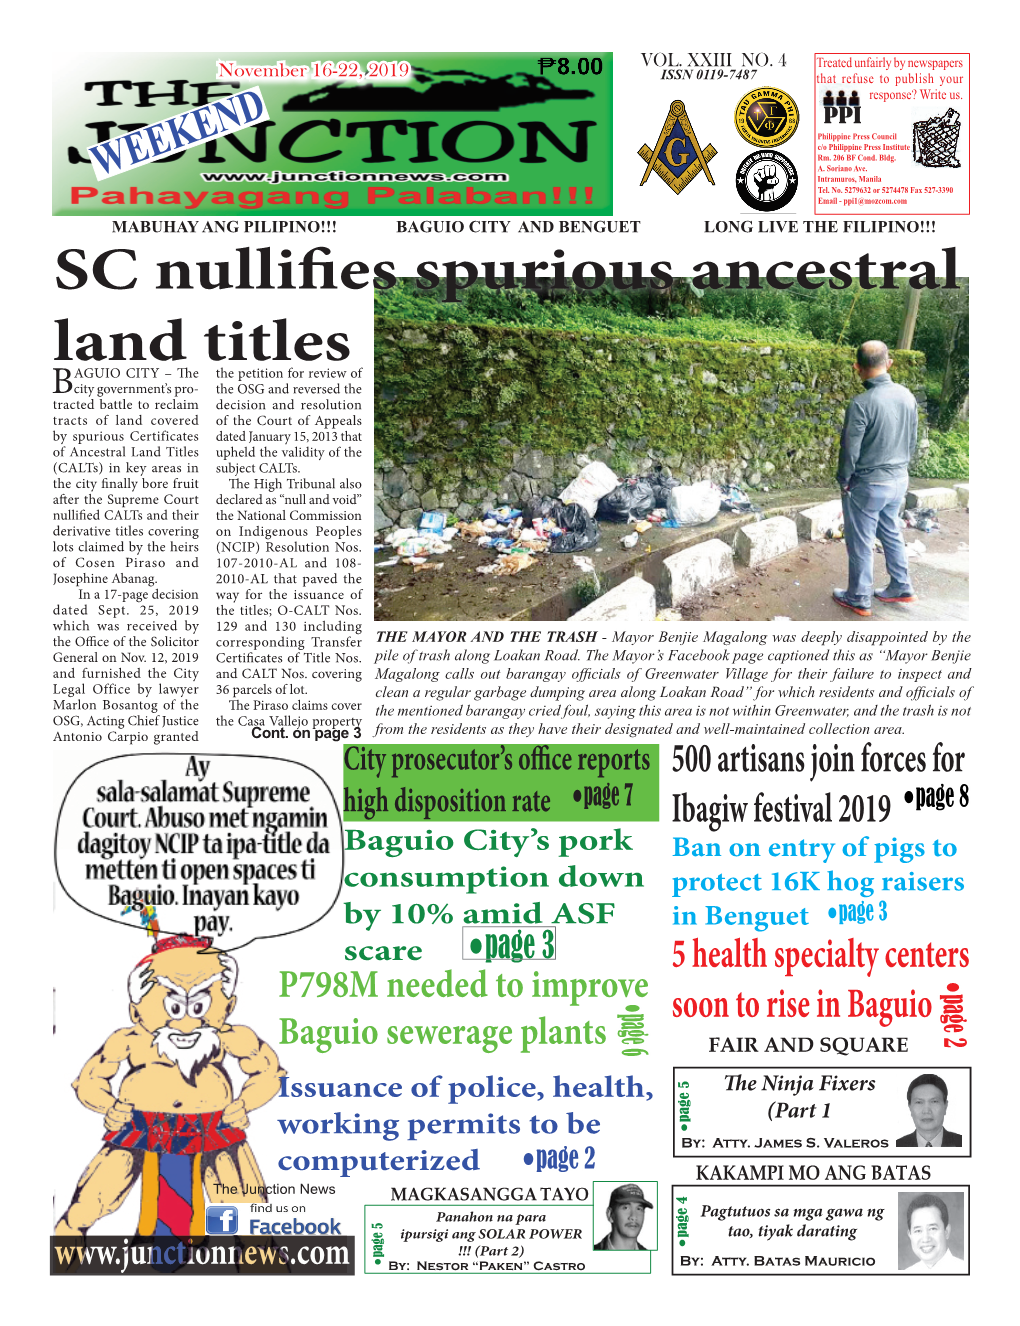 SC Nullifies Spurious Ancestral Land Titles